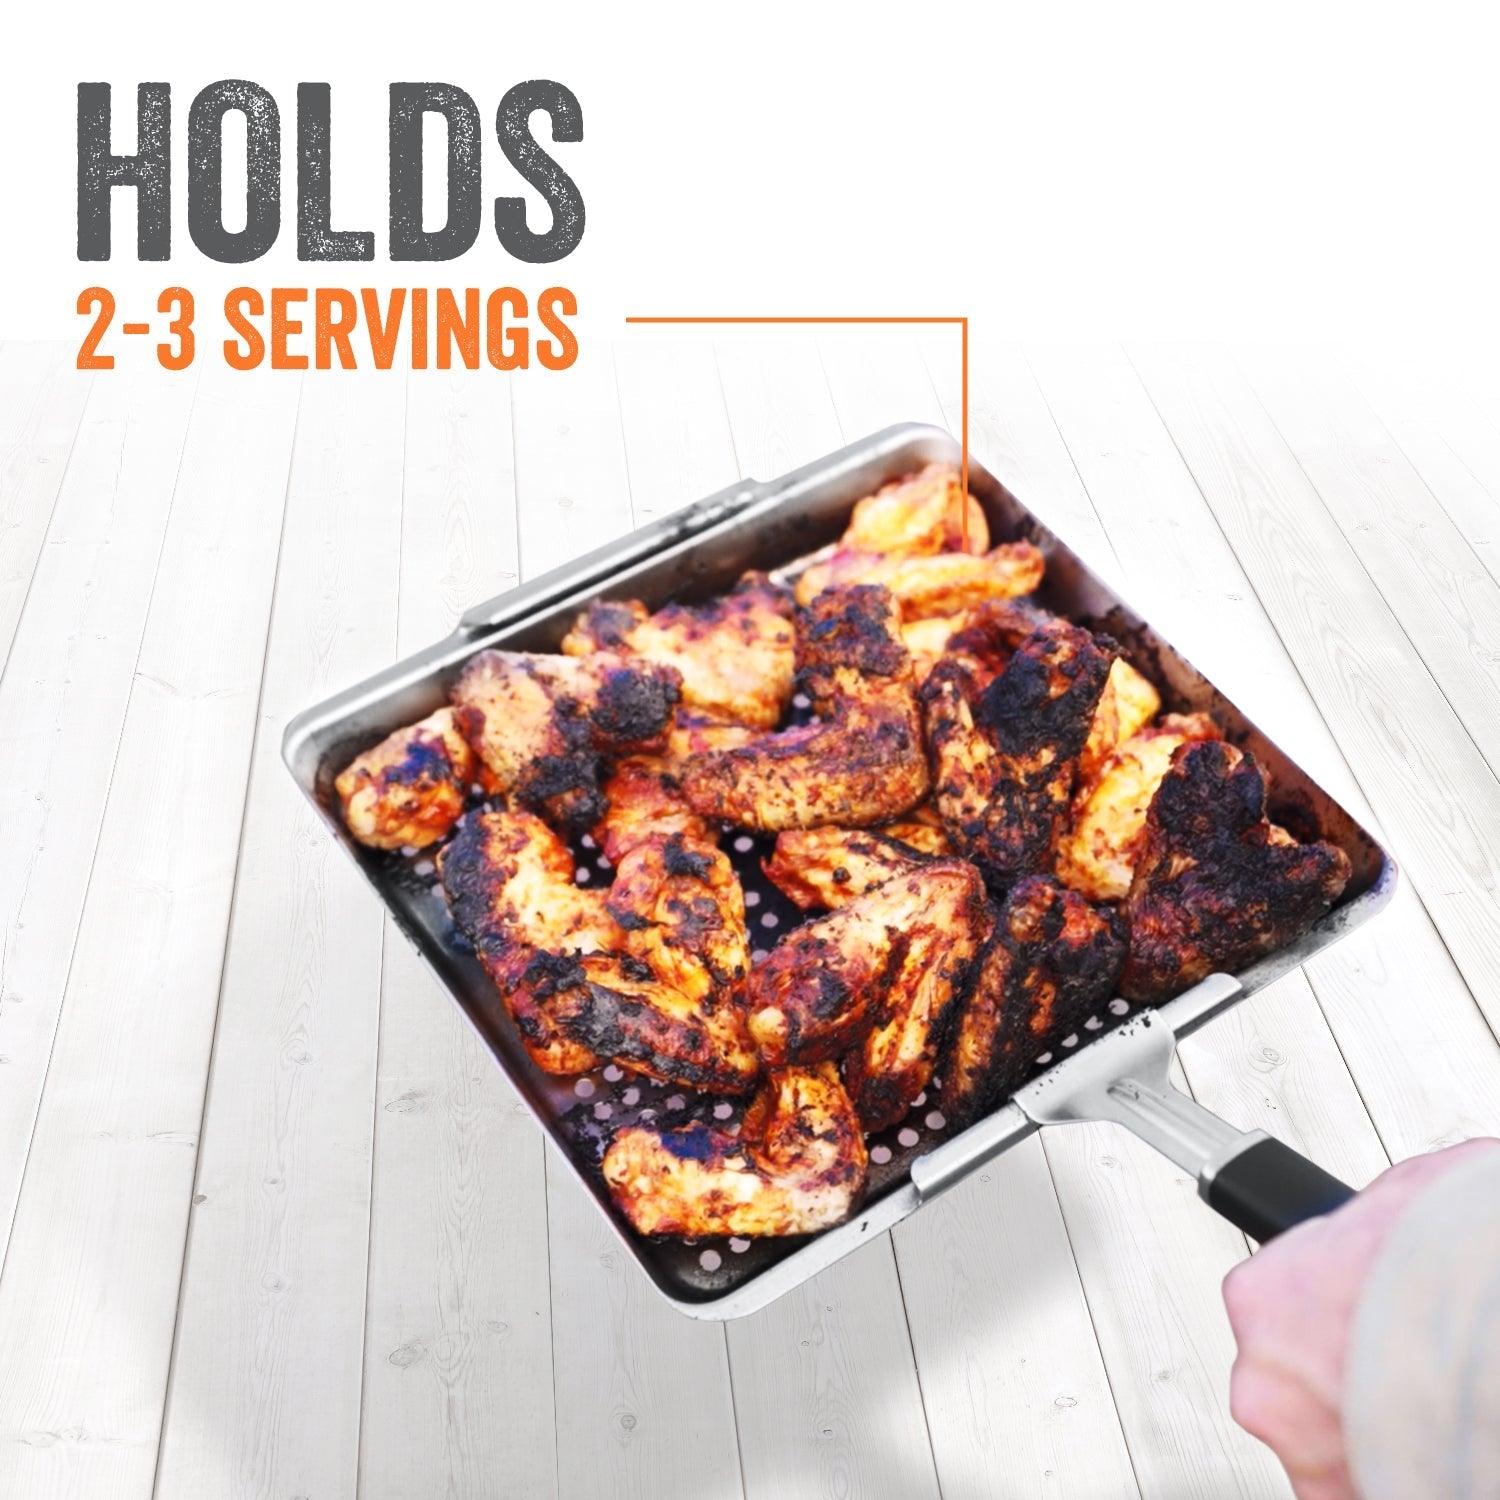 Yukon Glory Grill 'N Serve: Wide Tray and Clip-on Handle Set  from Yukon Glory